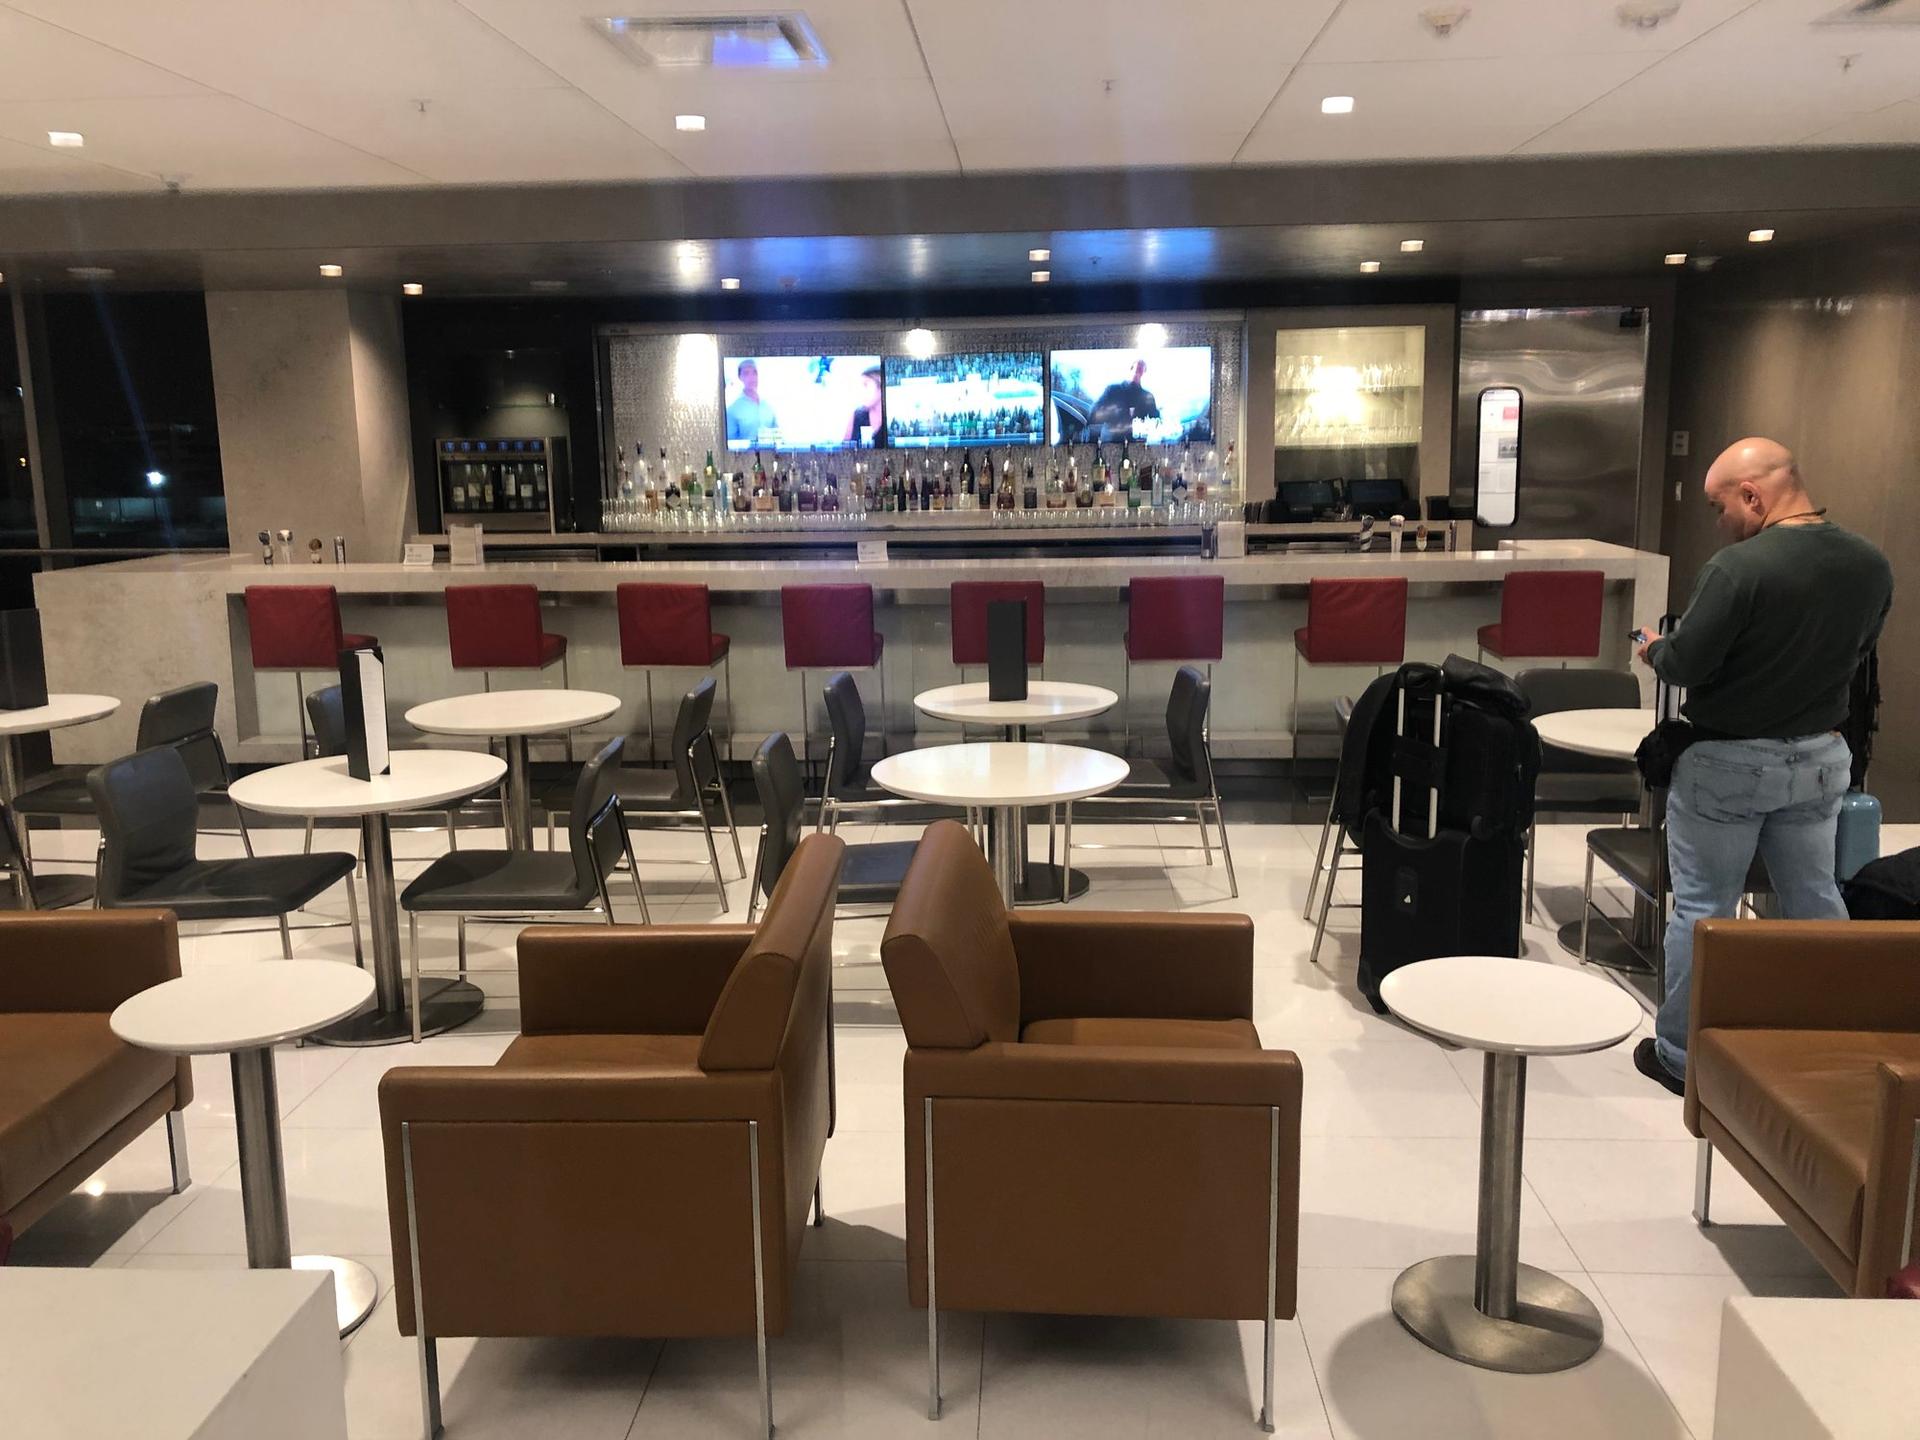 American Airlines Admirals Club (Gate D15) image 25 of 25